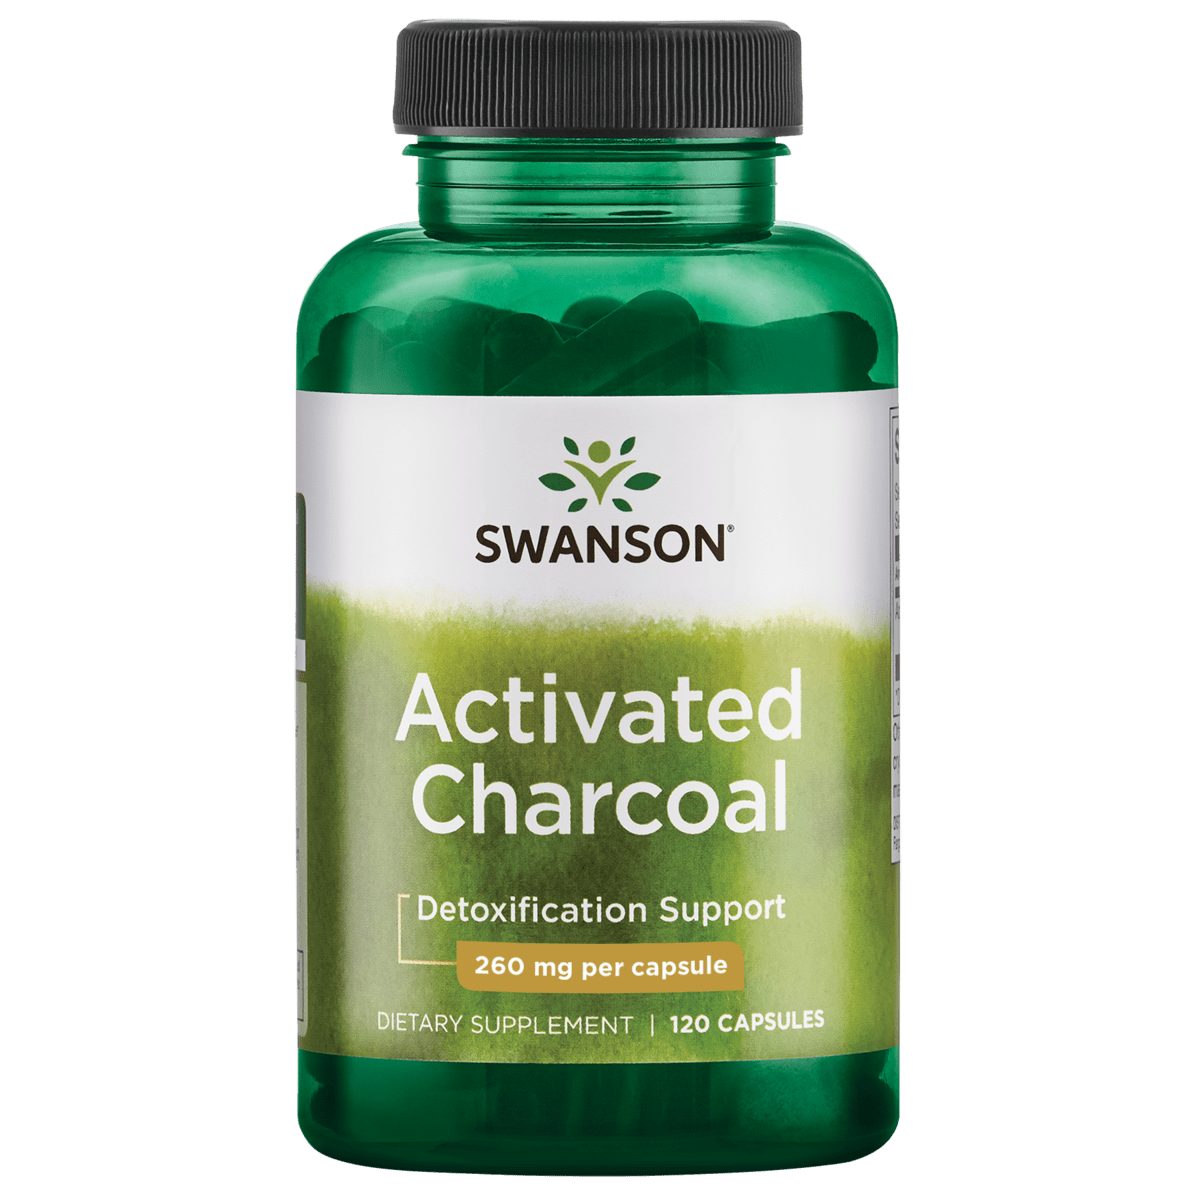 Swanson Activated Charcoal 260mg | healthy.co.nz